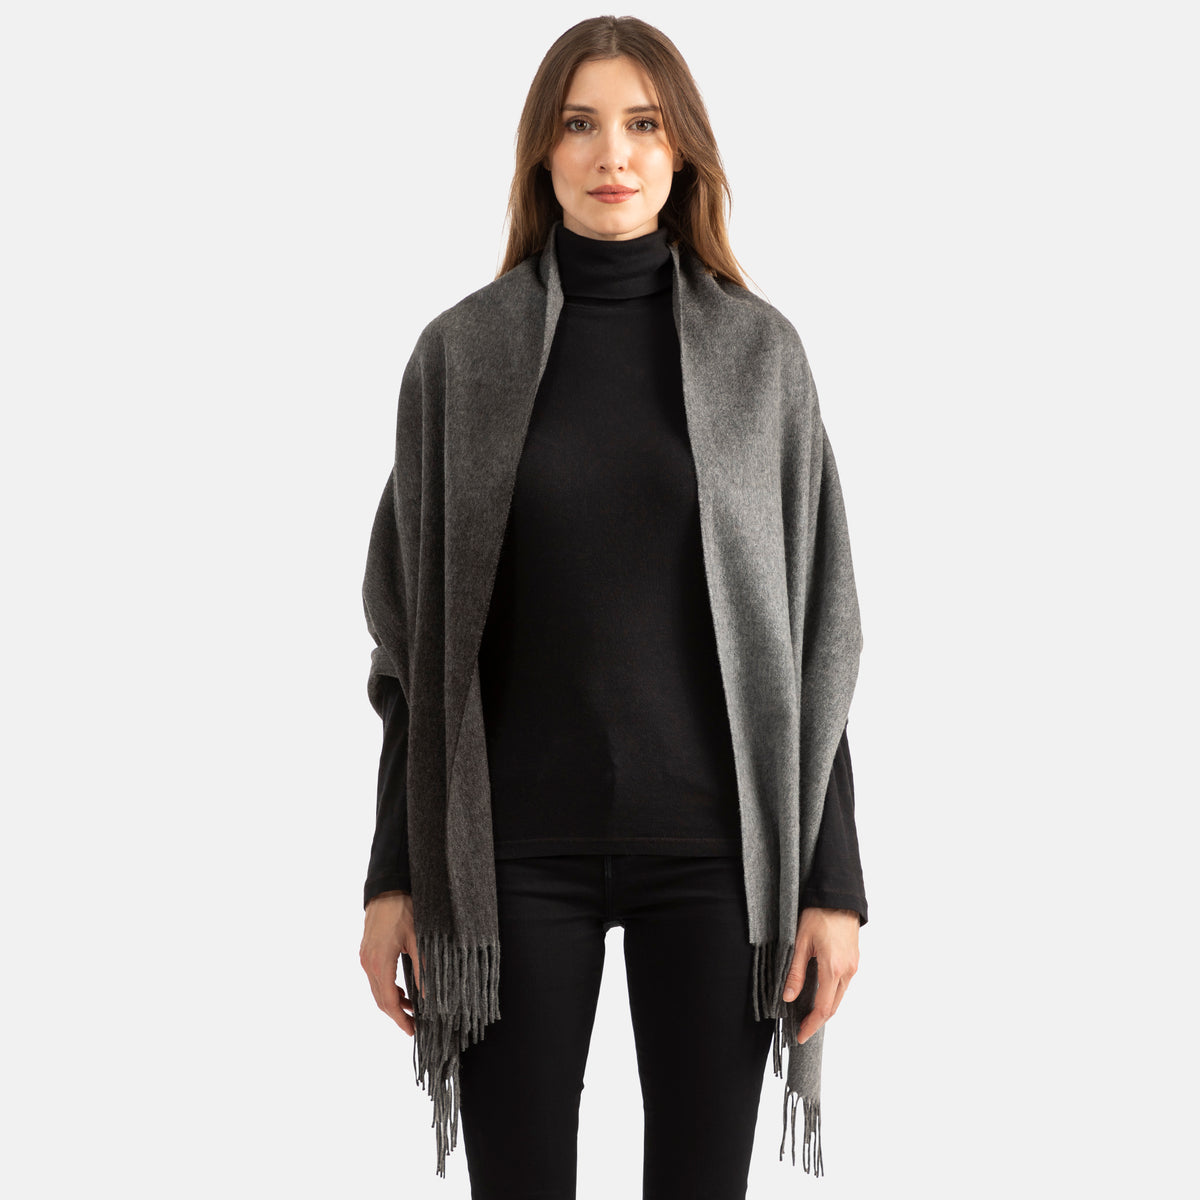 Picture of a woman wearing a double face, long woven cashmere wrap with fringe,in two tones of grey with ombre design.